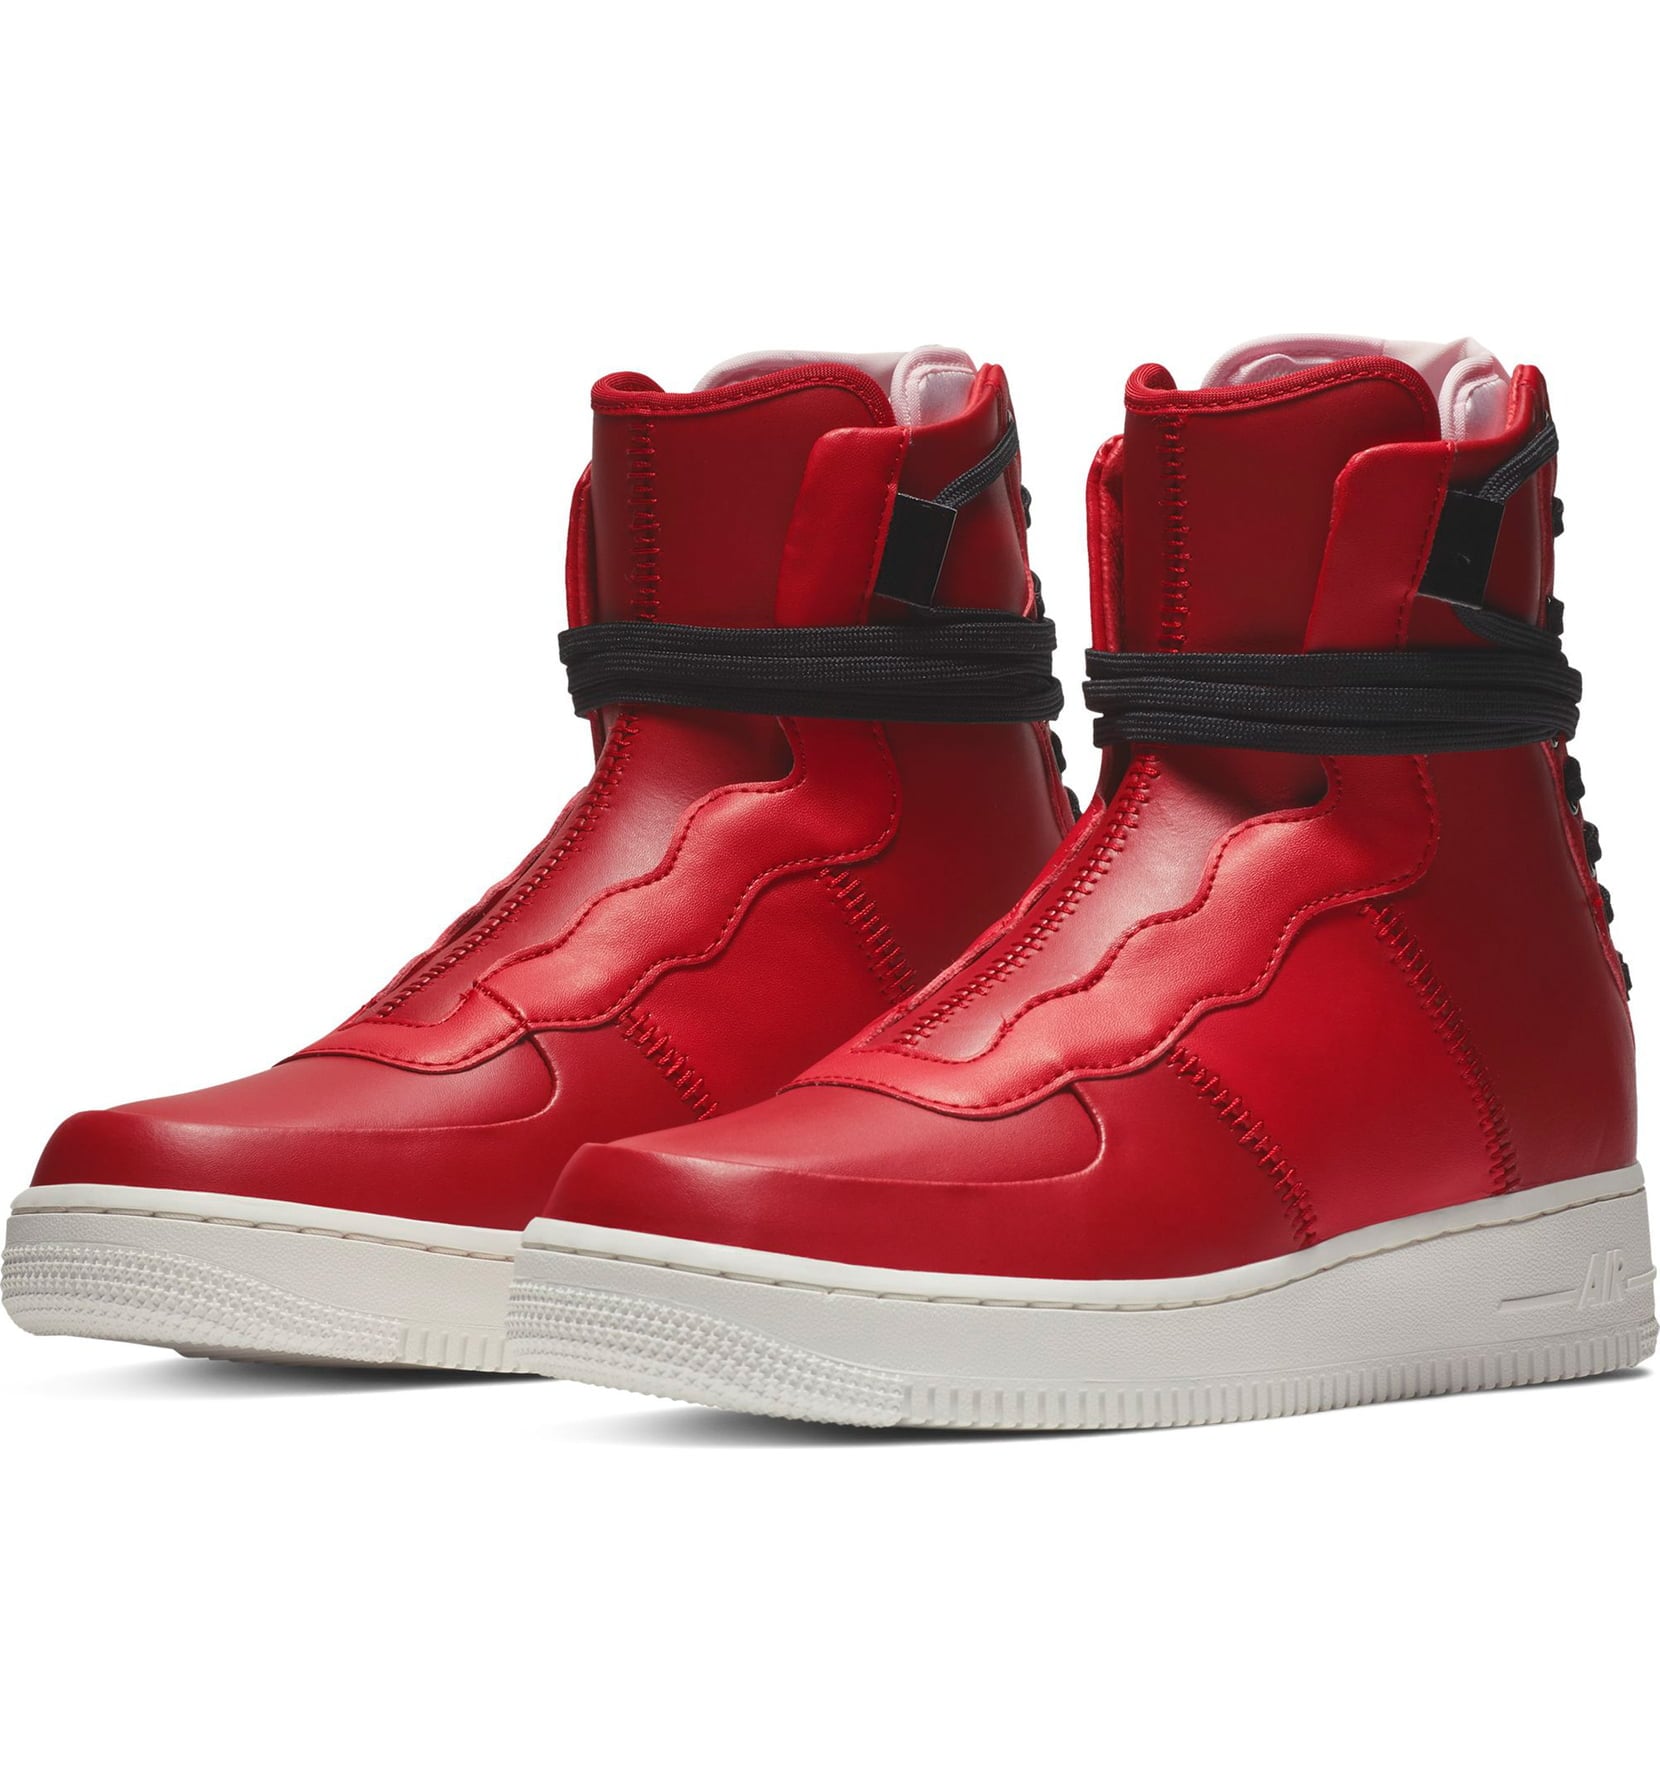 red high top nike